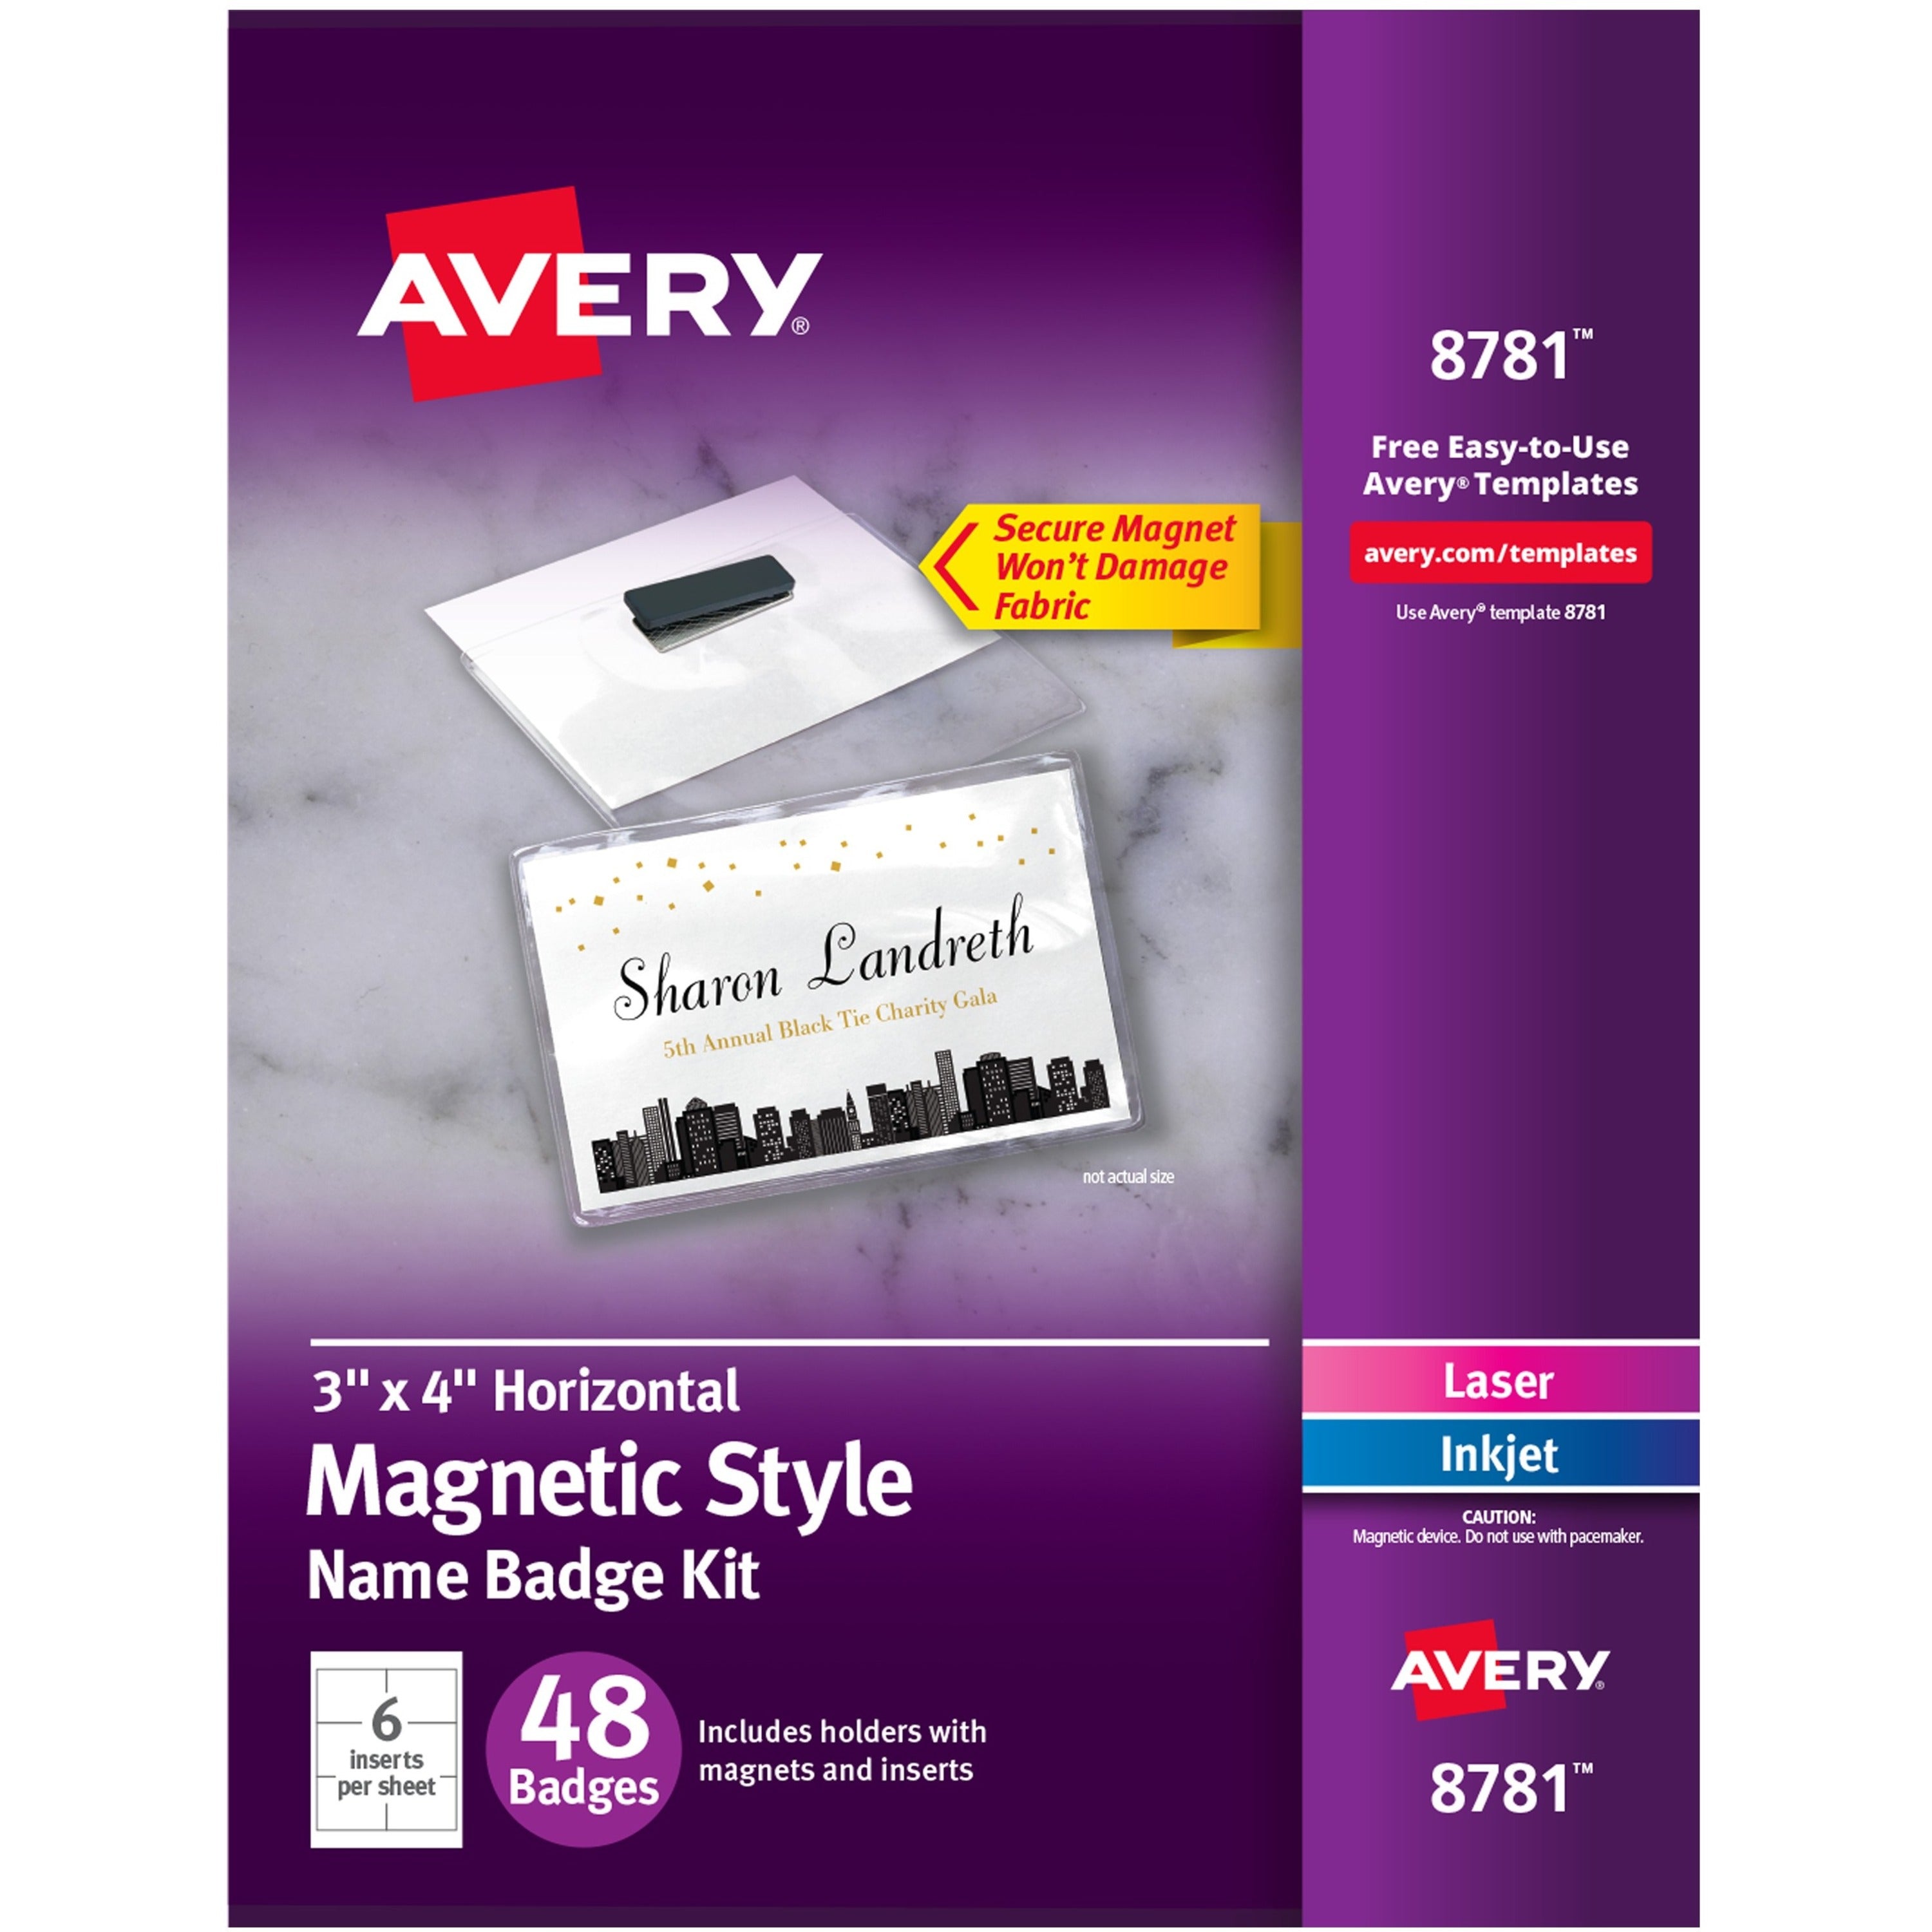 avery-name-badge-5-carton-rectangular-shape-non-adhesive-non-toxic-durable-magnetic-heavy-duty-printable-micro-perforated-recyclable-pvc-plastic-white_ave08781 - 1